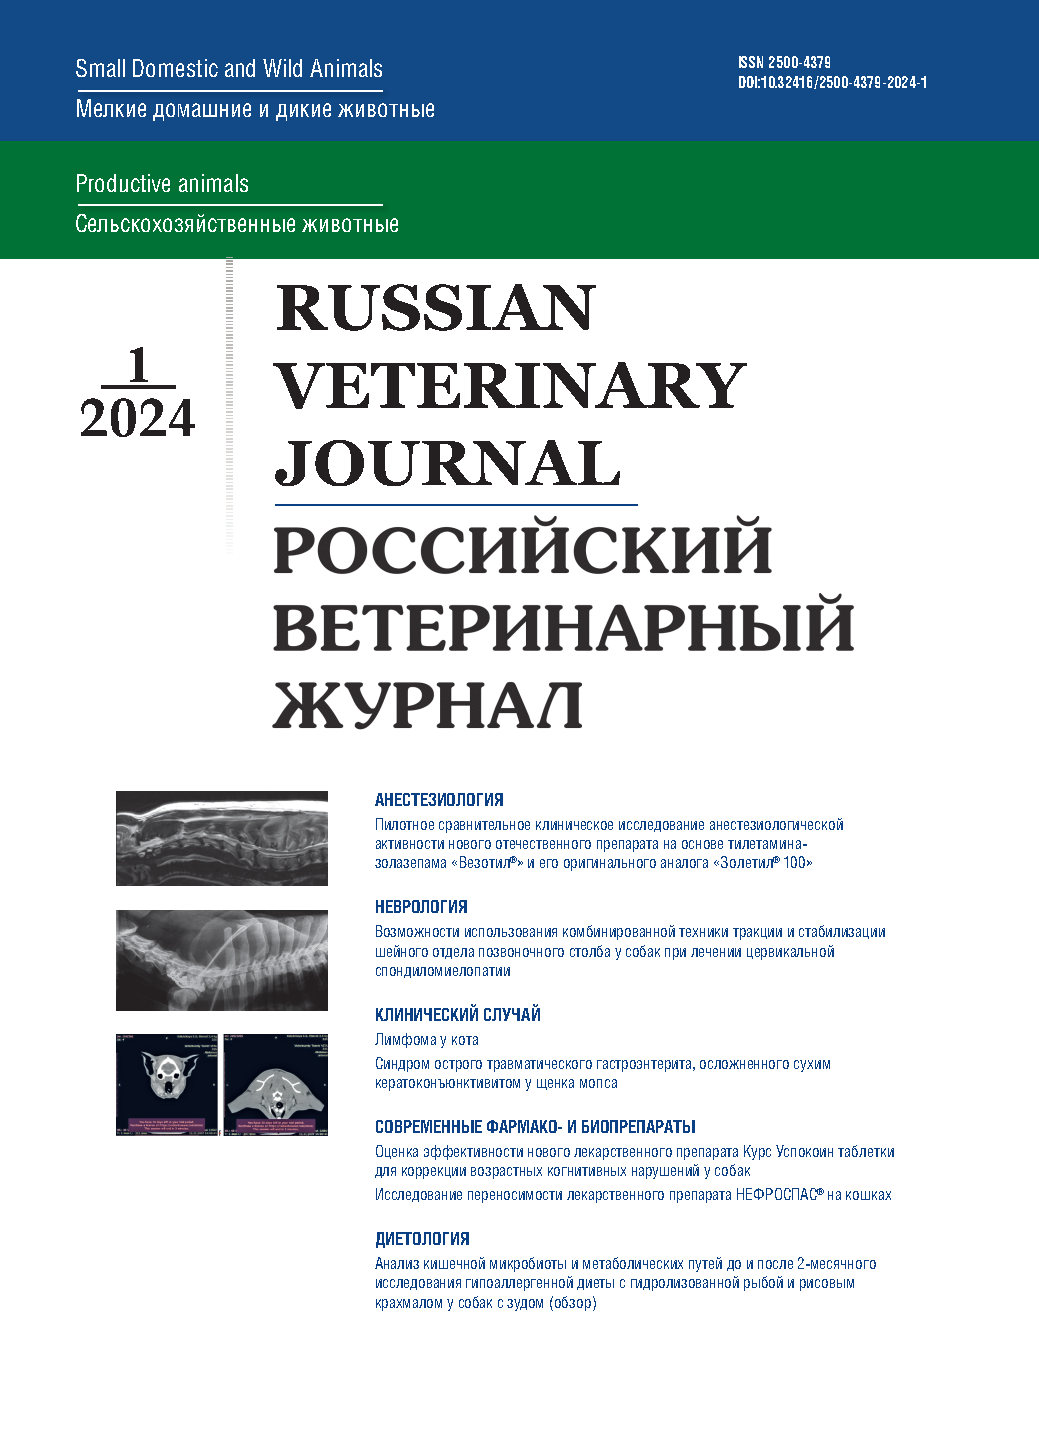                         Evaluation of the effectiveness of a new drug Kurs Uspokoin tablets for the correction of age-related cognitive impairment in dogs
            